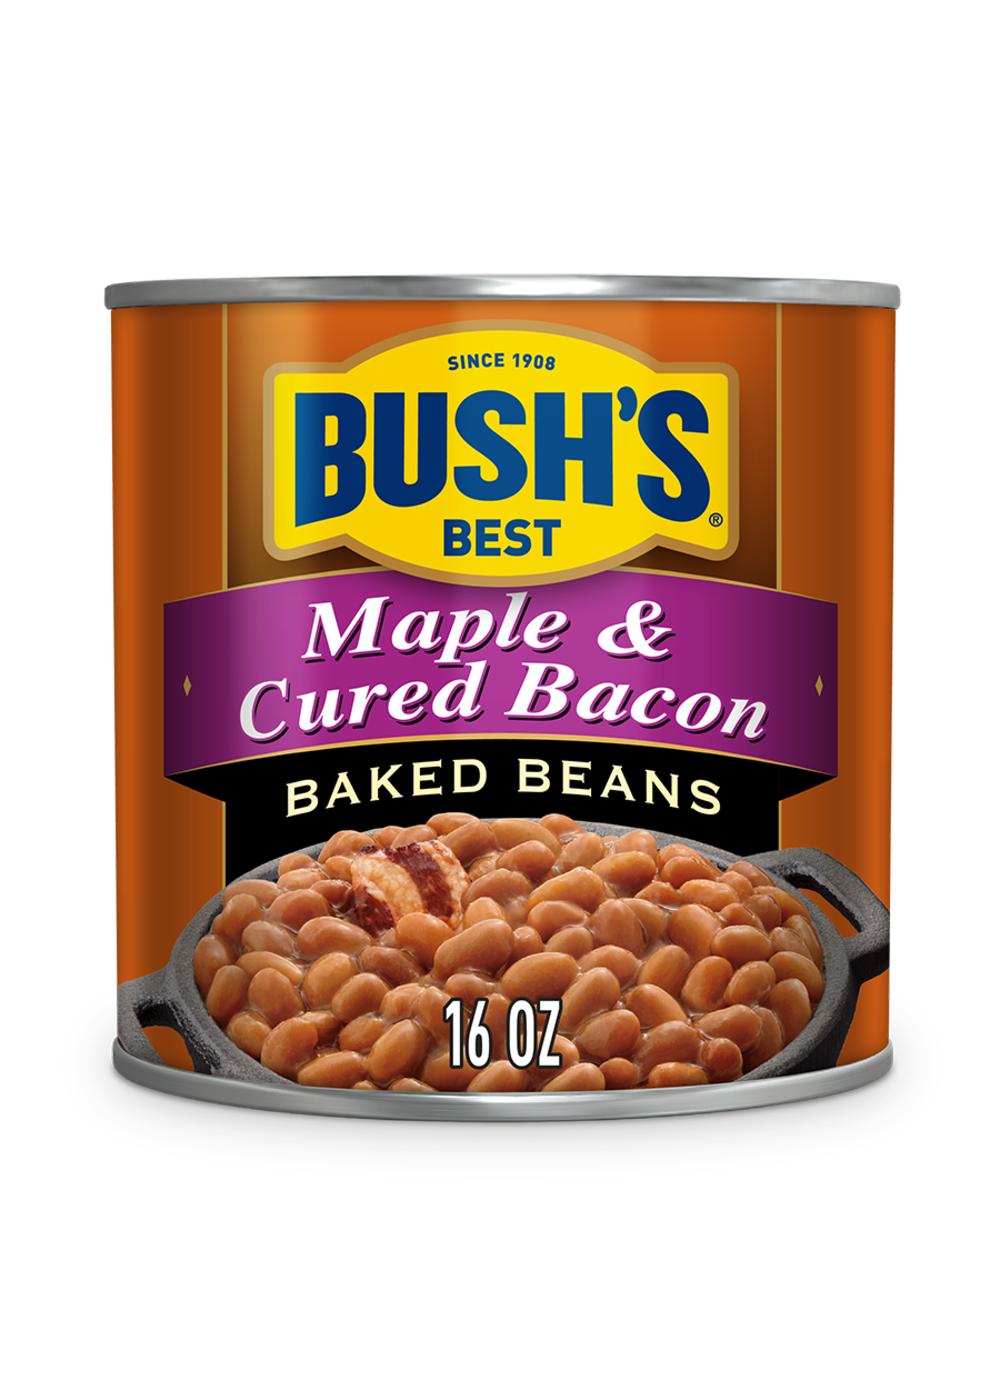 Bush's Best Maple & Cured Bacon Baked Beans; image 1 of 3